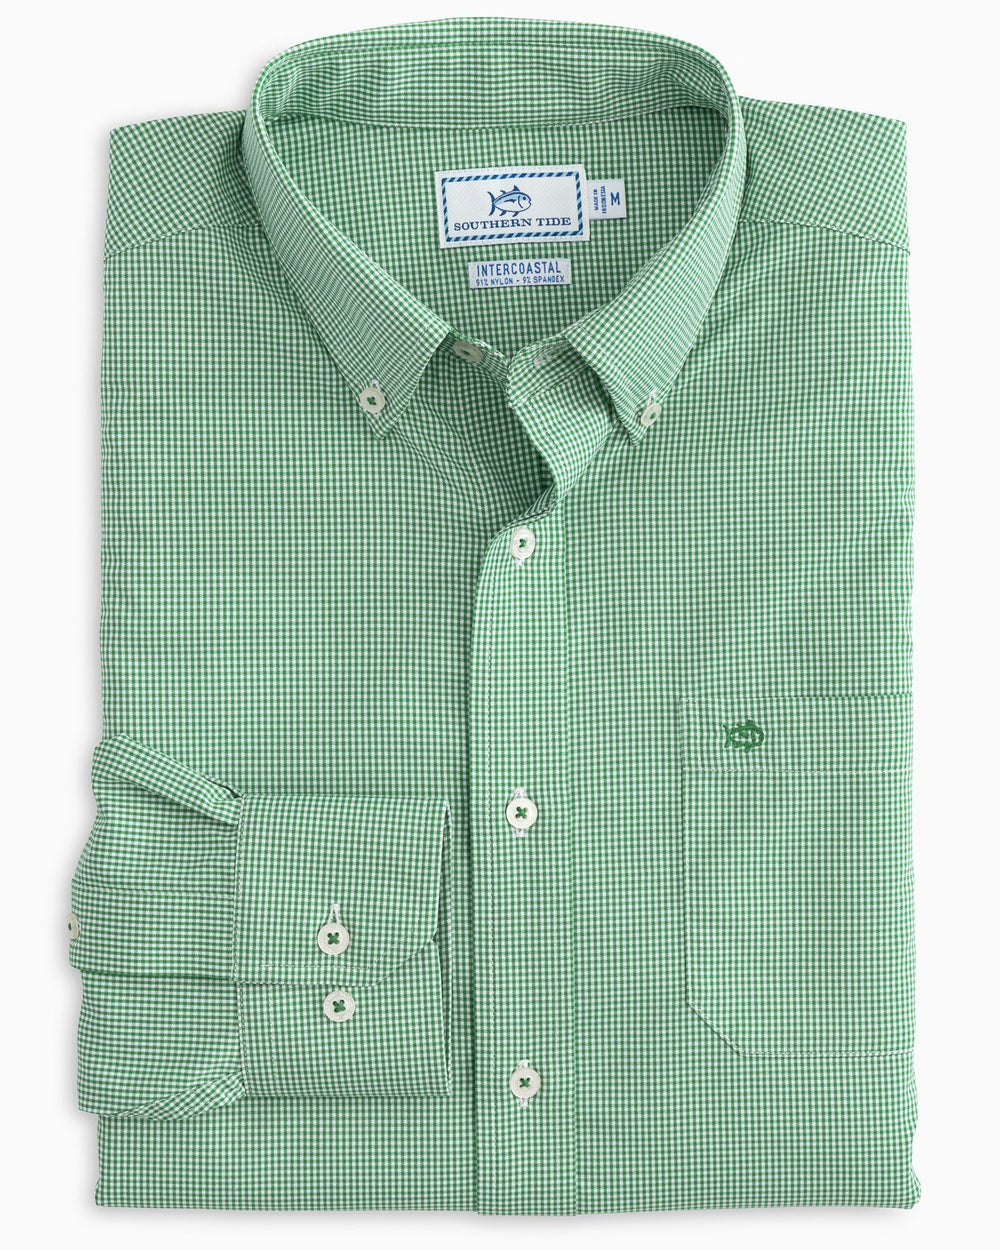 The front view of the Men's Green Micro Gingham Intercoastal Performance Sport Shirt by Southern Tide - surf green